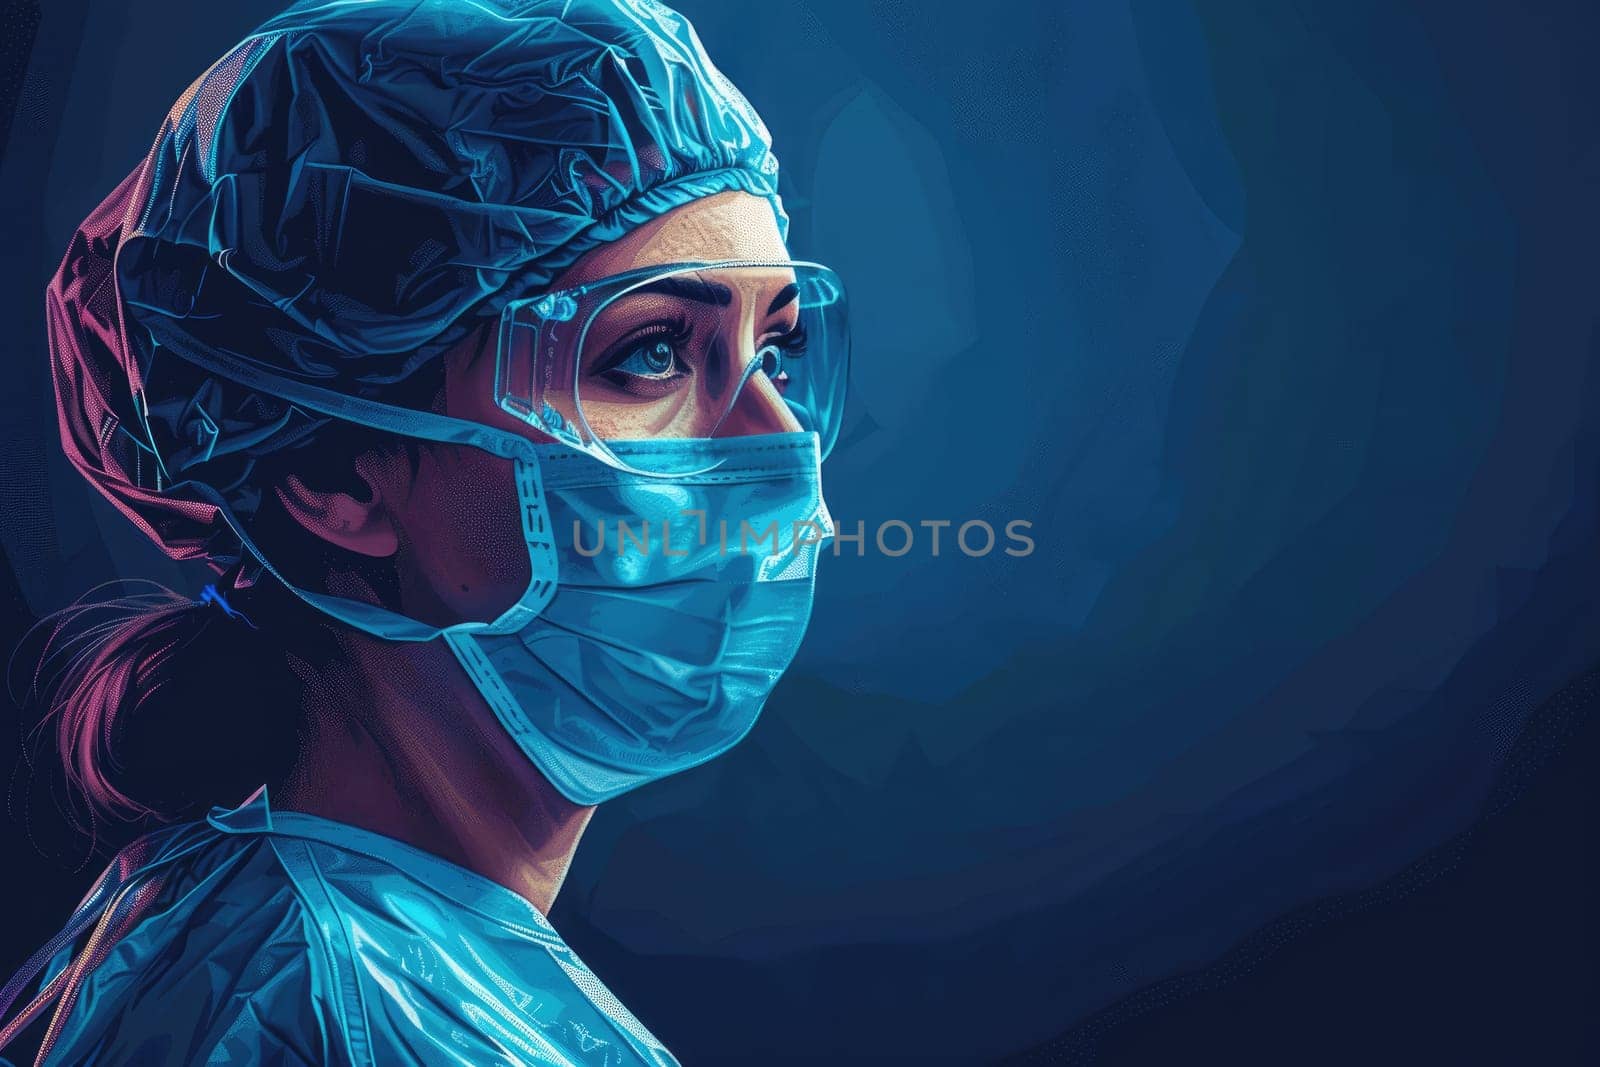 A Surgeon, A medical worker in personal protective gear, Confident medical professional.